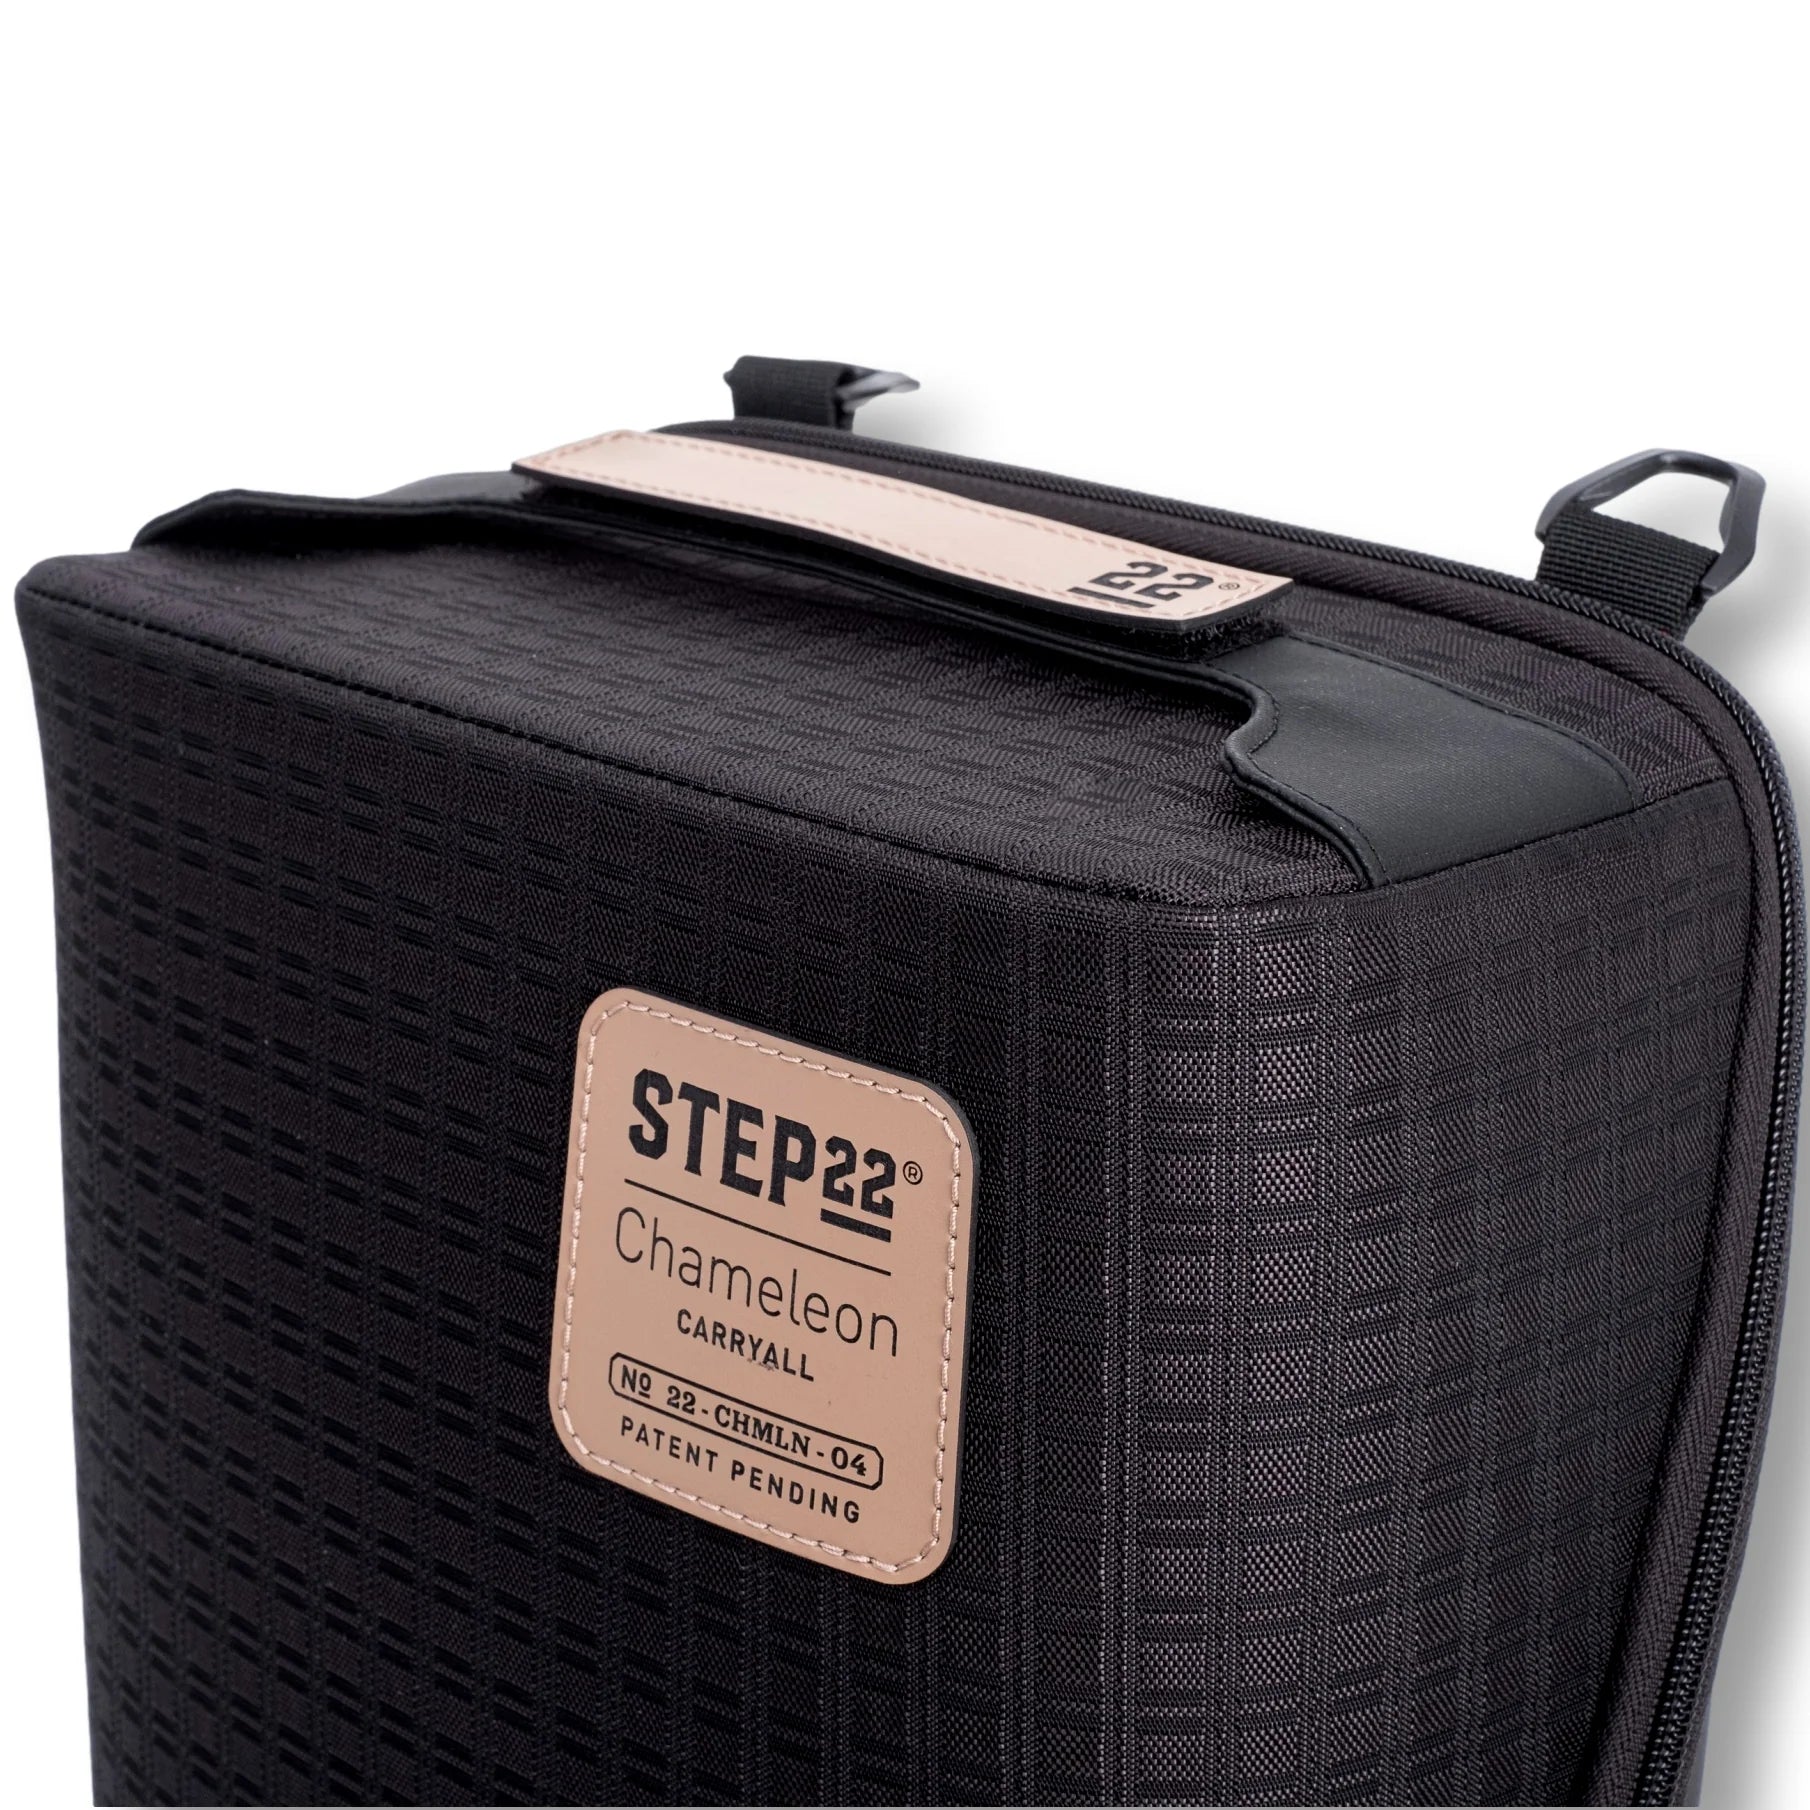 Step22 Chameleon™ Carryall with REEF Panel